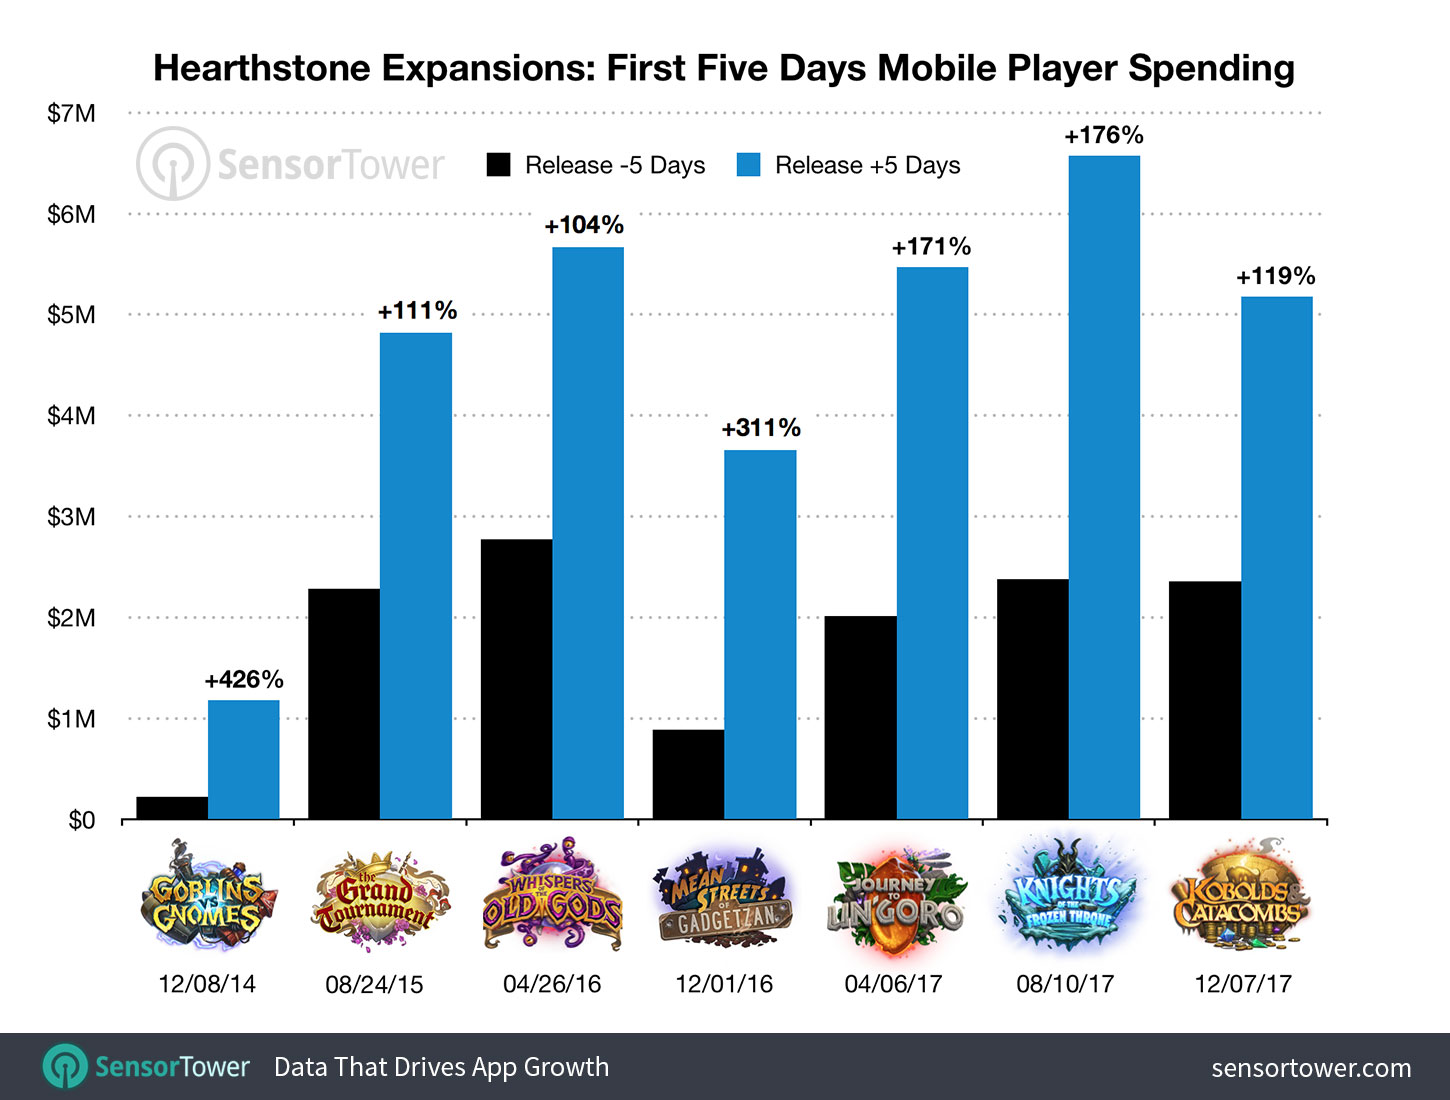 Hearthstone's Kobolds and Expansion Doubled the Game's Mobile